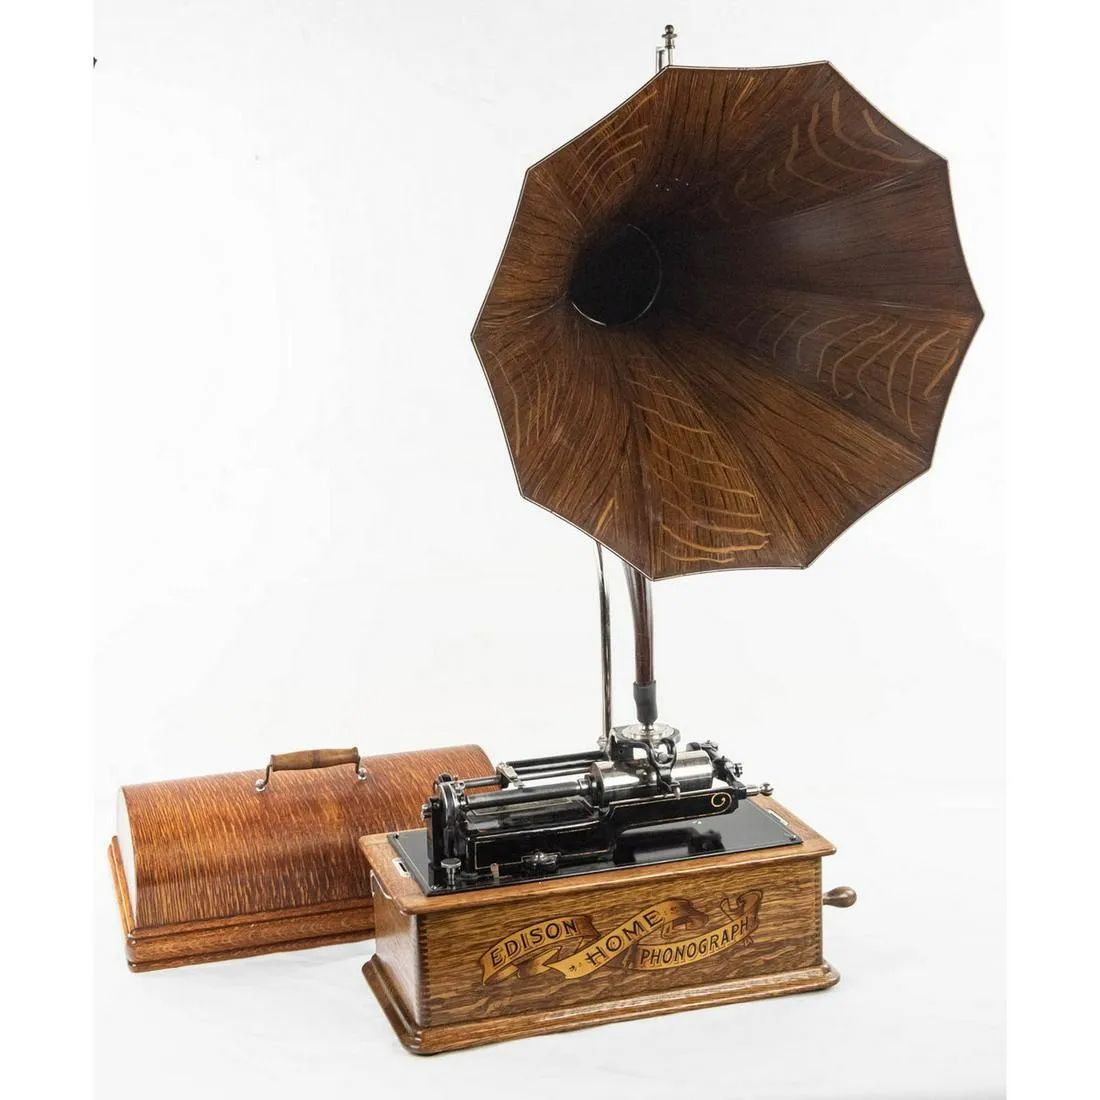 Edison Home Model A Phonograph with Cygnet Horn Edison Home Model A phonograph w&hellip;